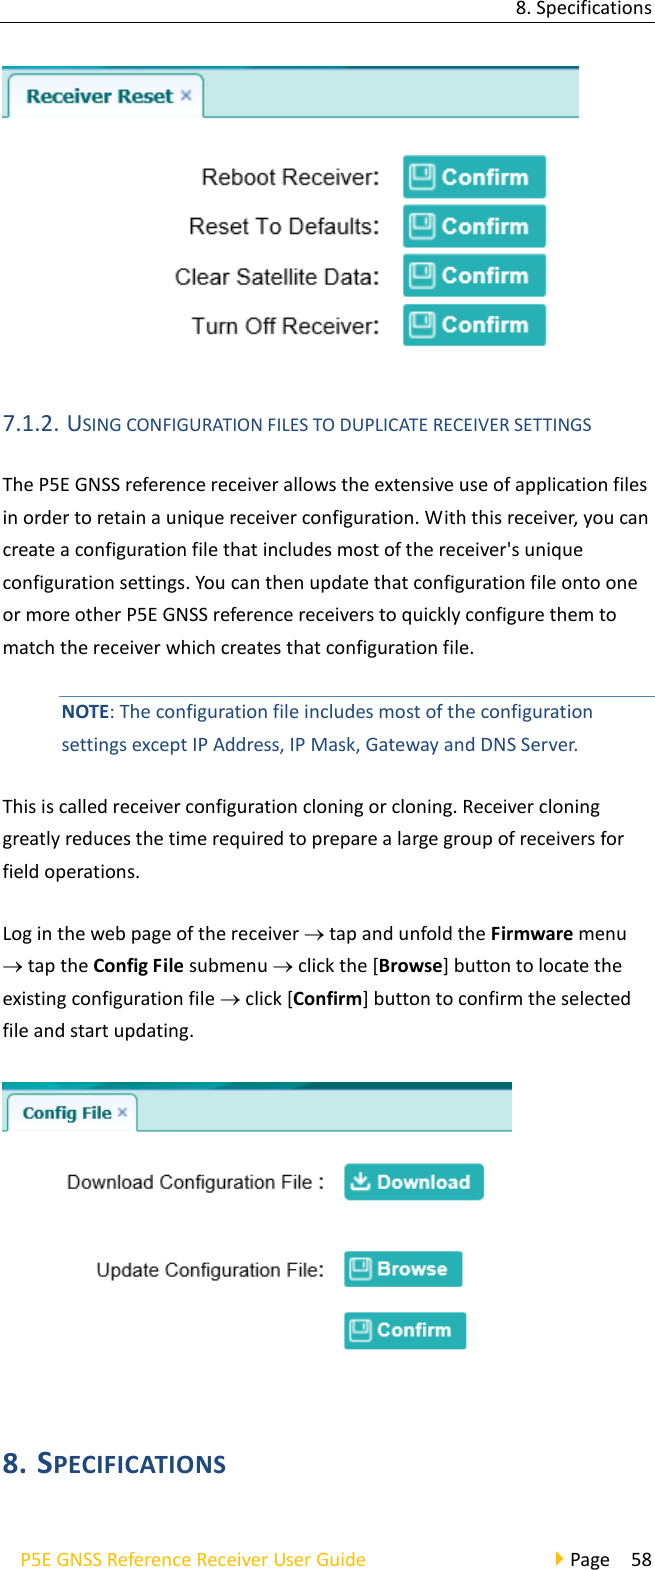 8. Specifications P5E GNSS Reference Receiver User Guide                                     Page  58  7.1.2. USING CONFIGURATION FILES TO DUPLICATE RECEIVER SETTINGS The P5E GNSS reference receiver allows the extensive use of application files in order to retain a unique receiver configuration. With this receiver, you can create a configuration file that includes most of the receiver&apos;s unique configuration settings. You can then update that configuration file onto one or more other P5E GNSS reference receivers to quickly configure them to match the receiver which creates that configuration file.   NOTE: The configuration file includes most of the configuration settings except IP Address, IP Mask, Gateway and DNS Server.   This is called receiver configuration cloning or cloning. Receiver cloning greatly reduces the time required to prepare a large group of receivers for field operations. Log in the web page of the receiver  tap and unfold the Firmware menu  tap the Config File submenu  click the [Browse] button to locate the existing configuration file  click [Confirm] button to confirm the selected file and start updating.  8. SPECIFICATIONS   